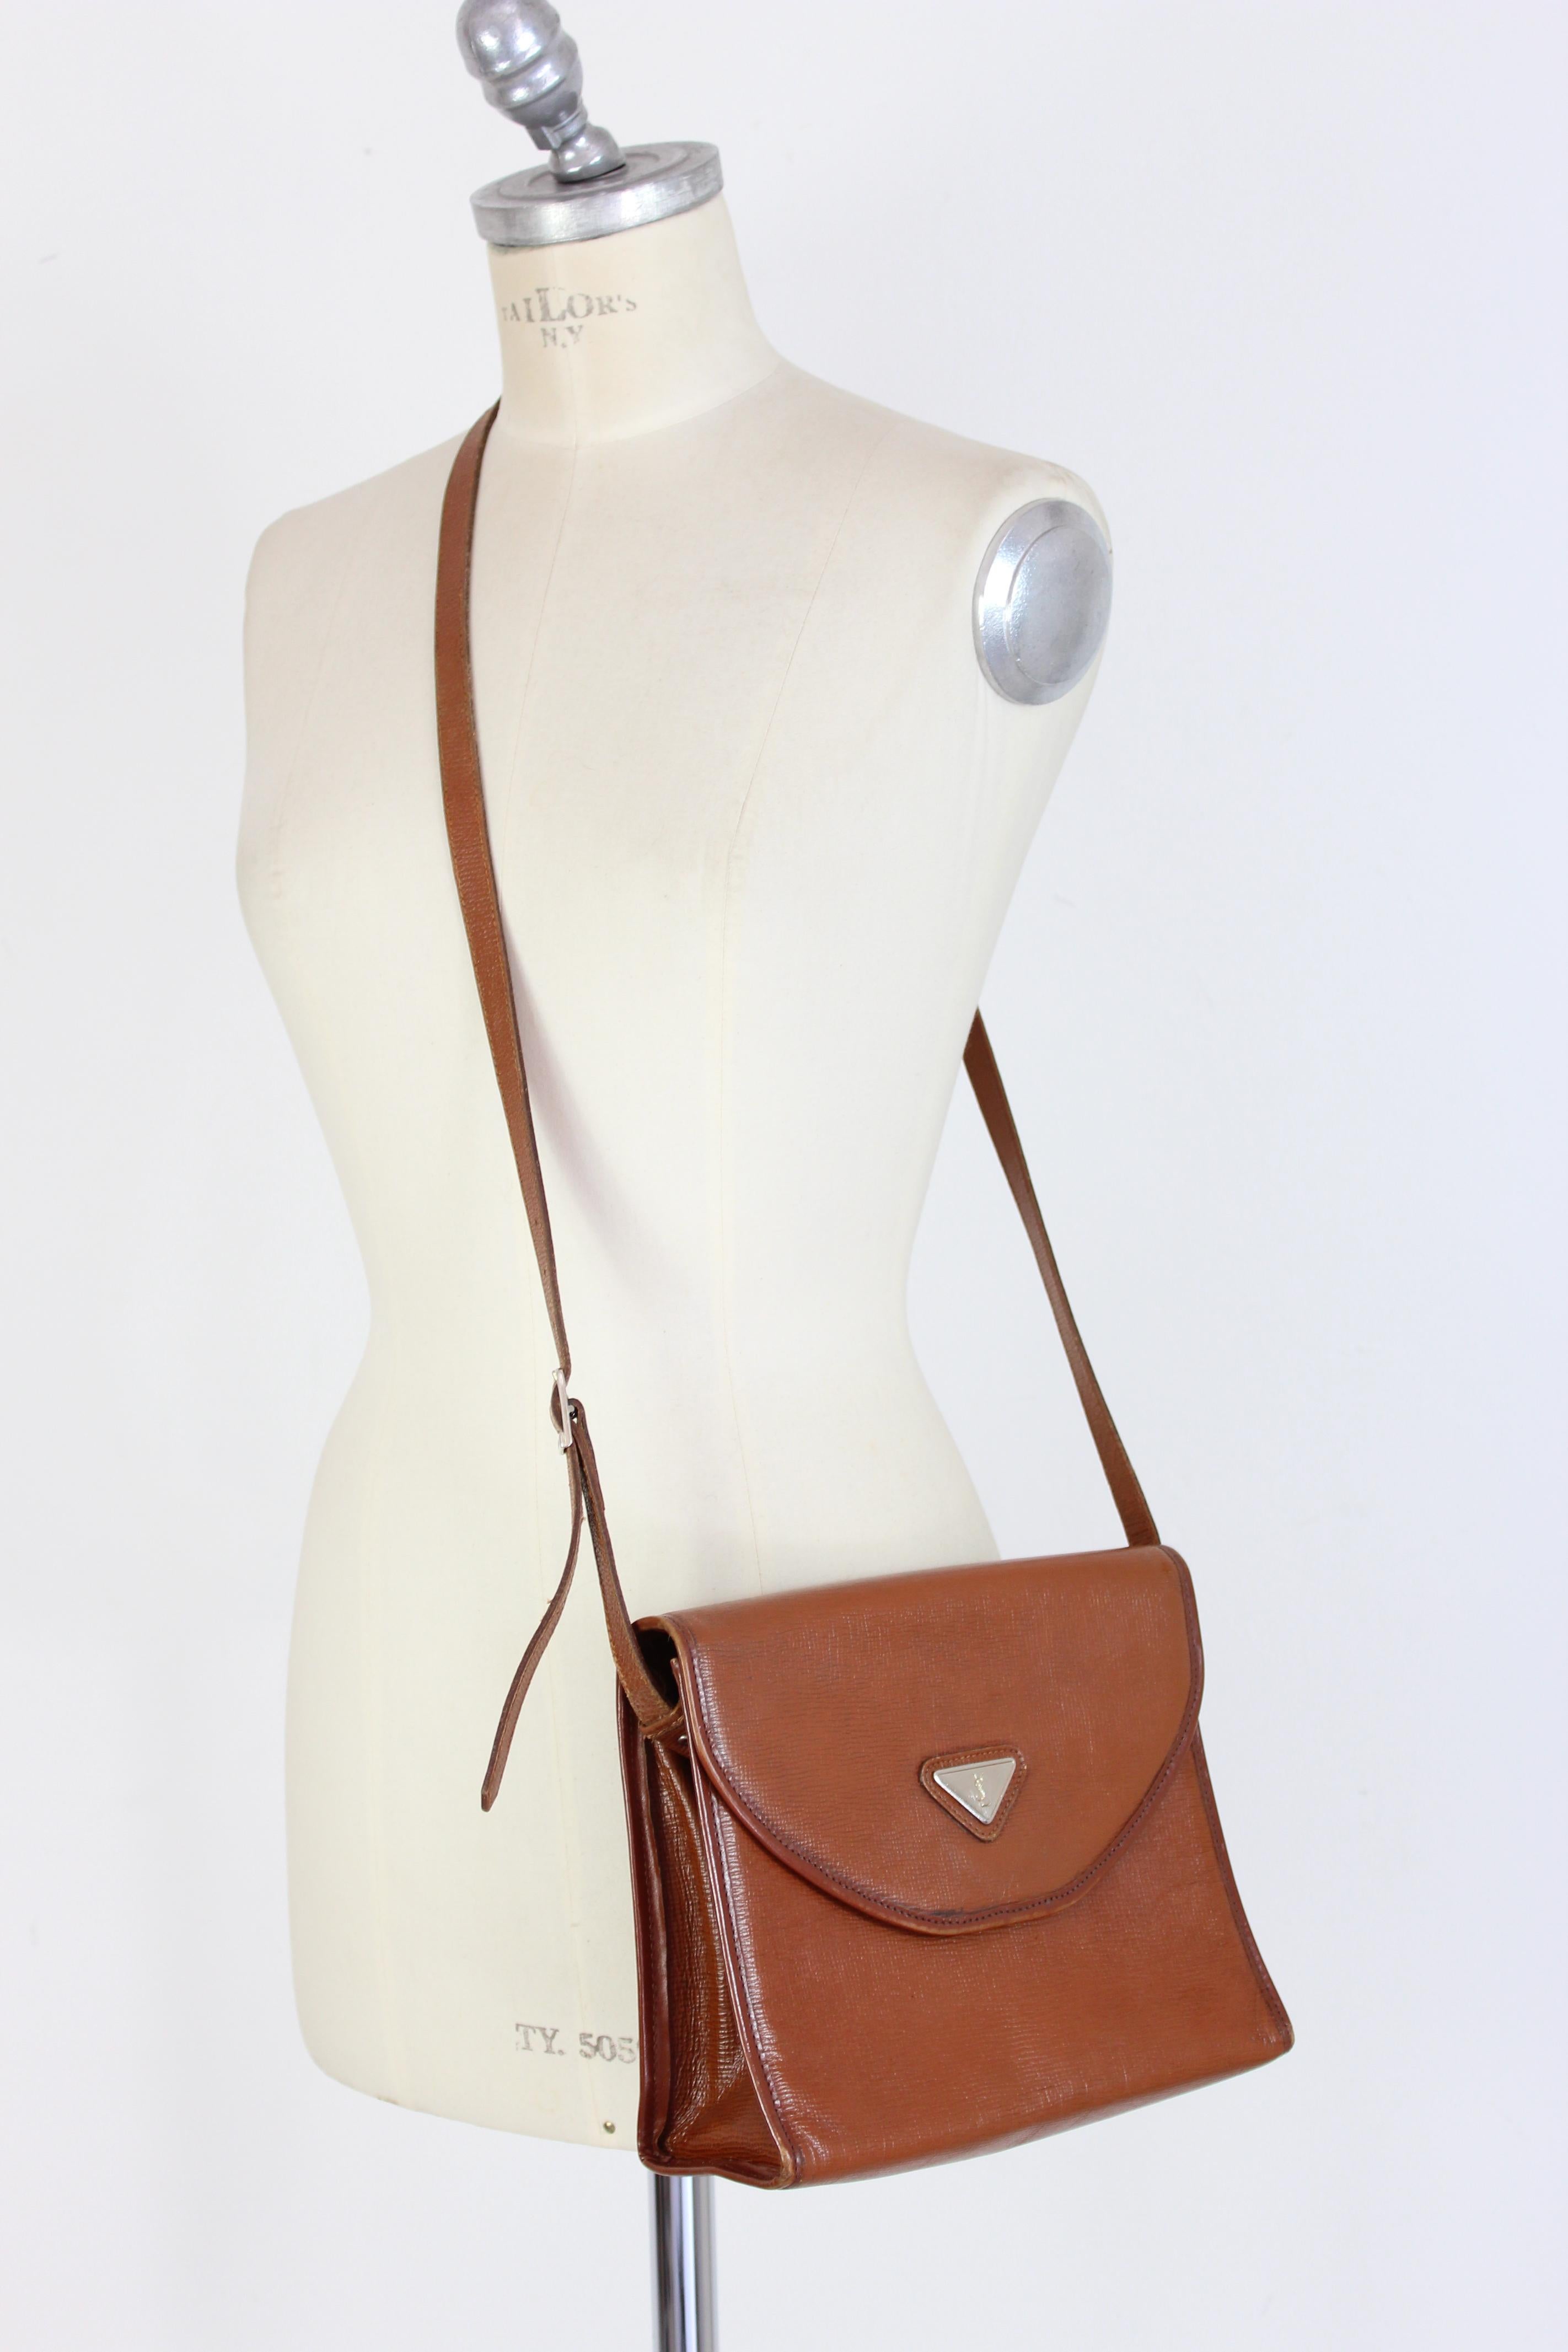 Yves Saint Laurent vintage 80s bag. Shoulder bag with adjustable shoulder strap, brown with gold-colored details. 100% leather fabric, clip button closure. Made in France.

Condition: Very Good

Item in excellent condition. There are slight signs of